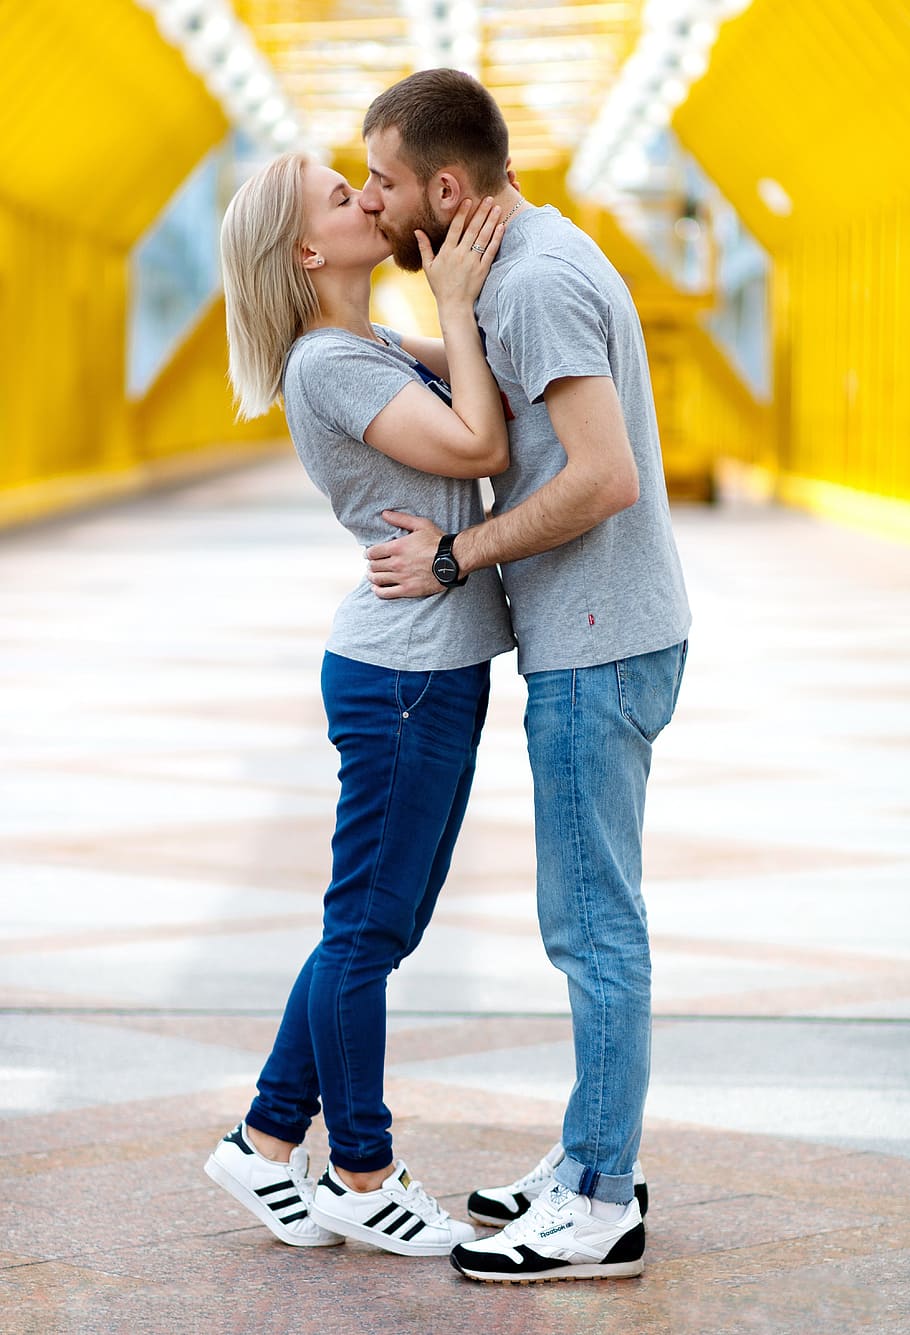 kissing couple in gray shirts with denim jeans and white-and-black shoes during daytime, HD wallpaper